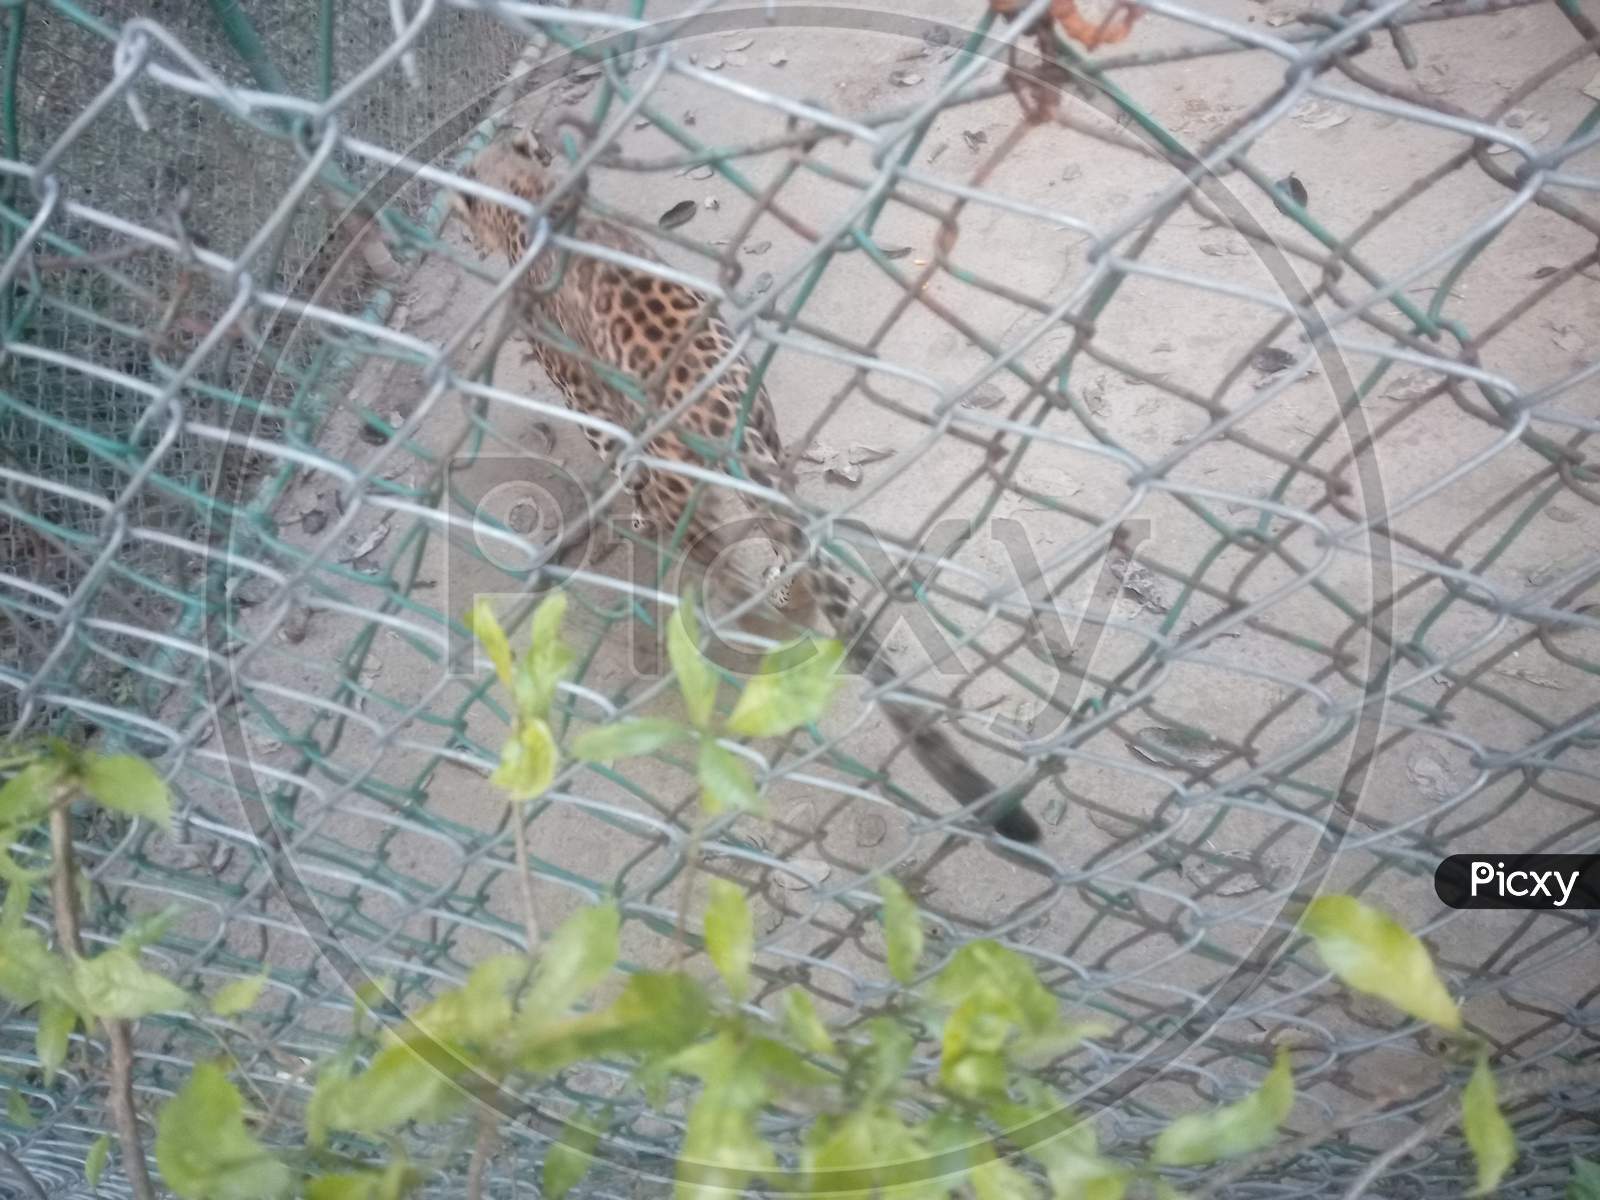 An Indian leopard in the zoo